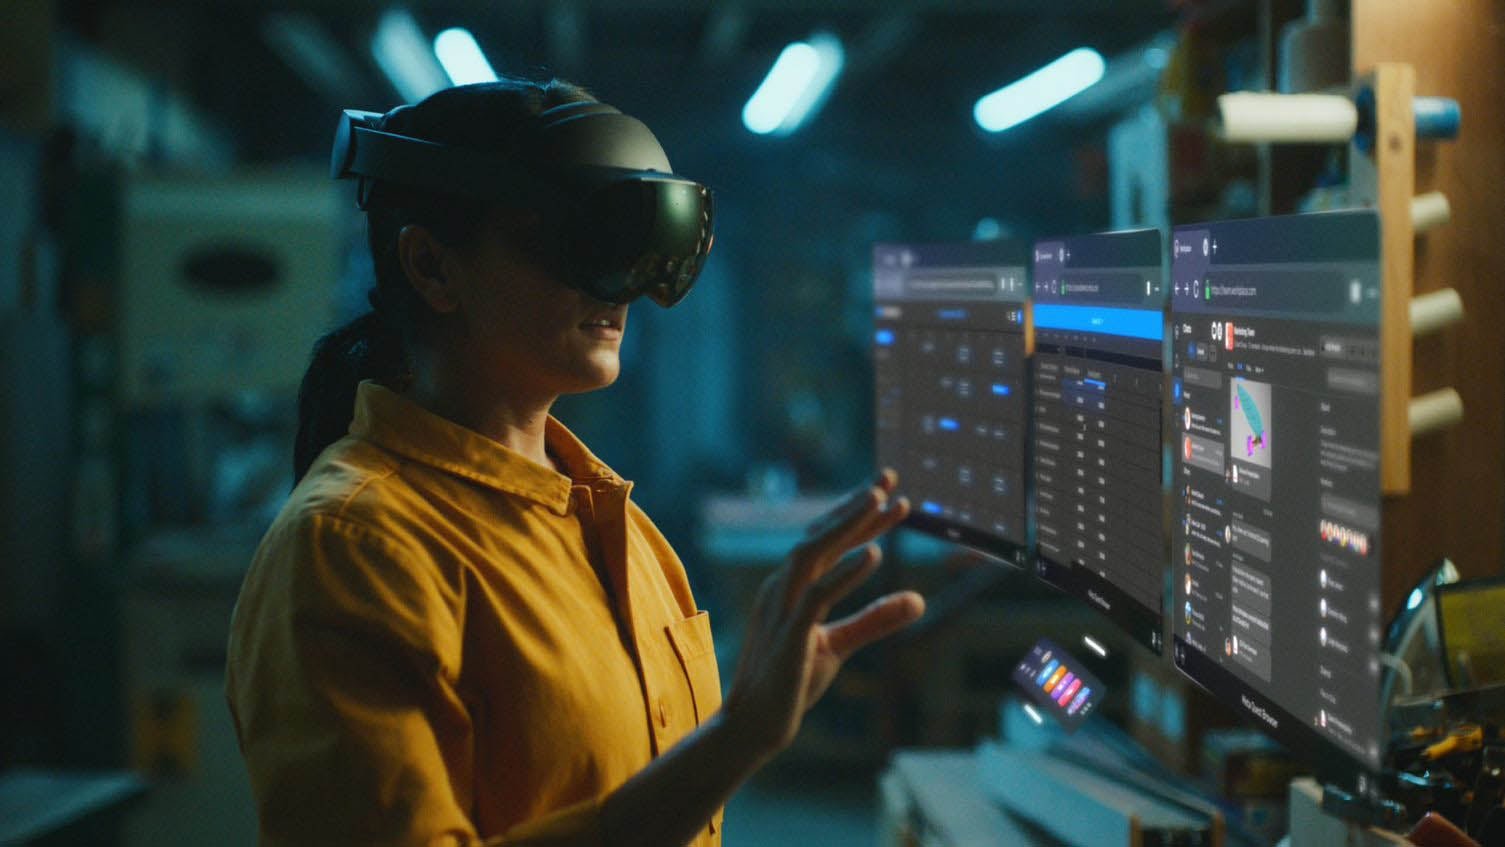 A person wearing a vr headset interacts with a futuristic holographic interface in a lively workshop setting.